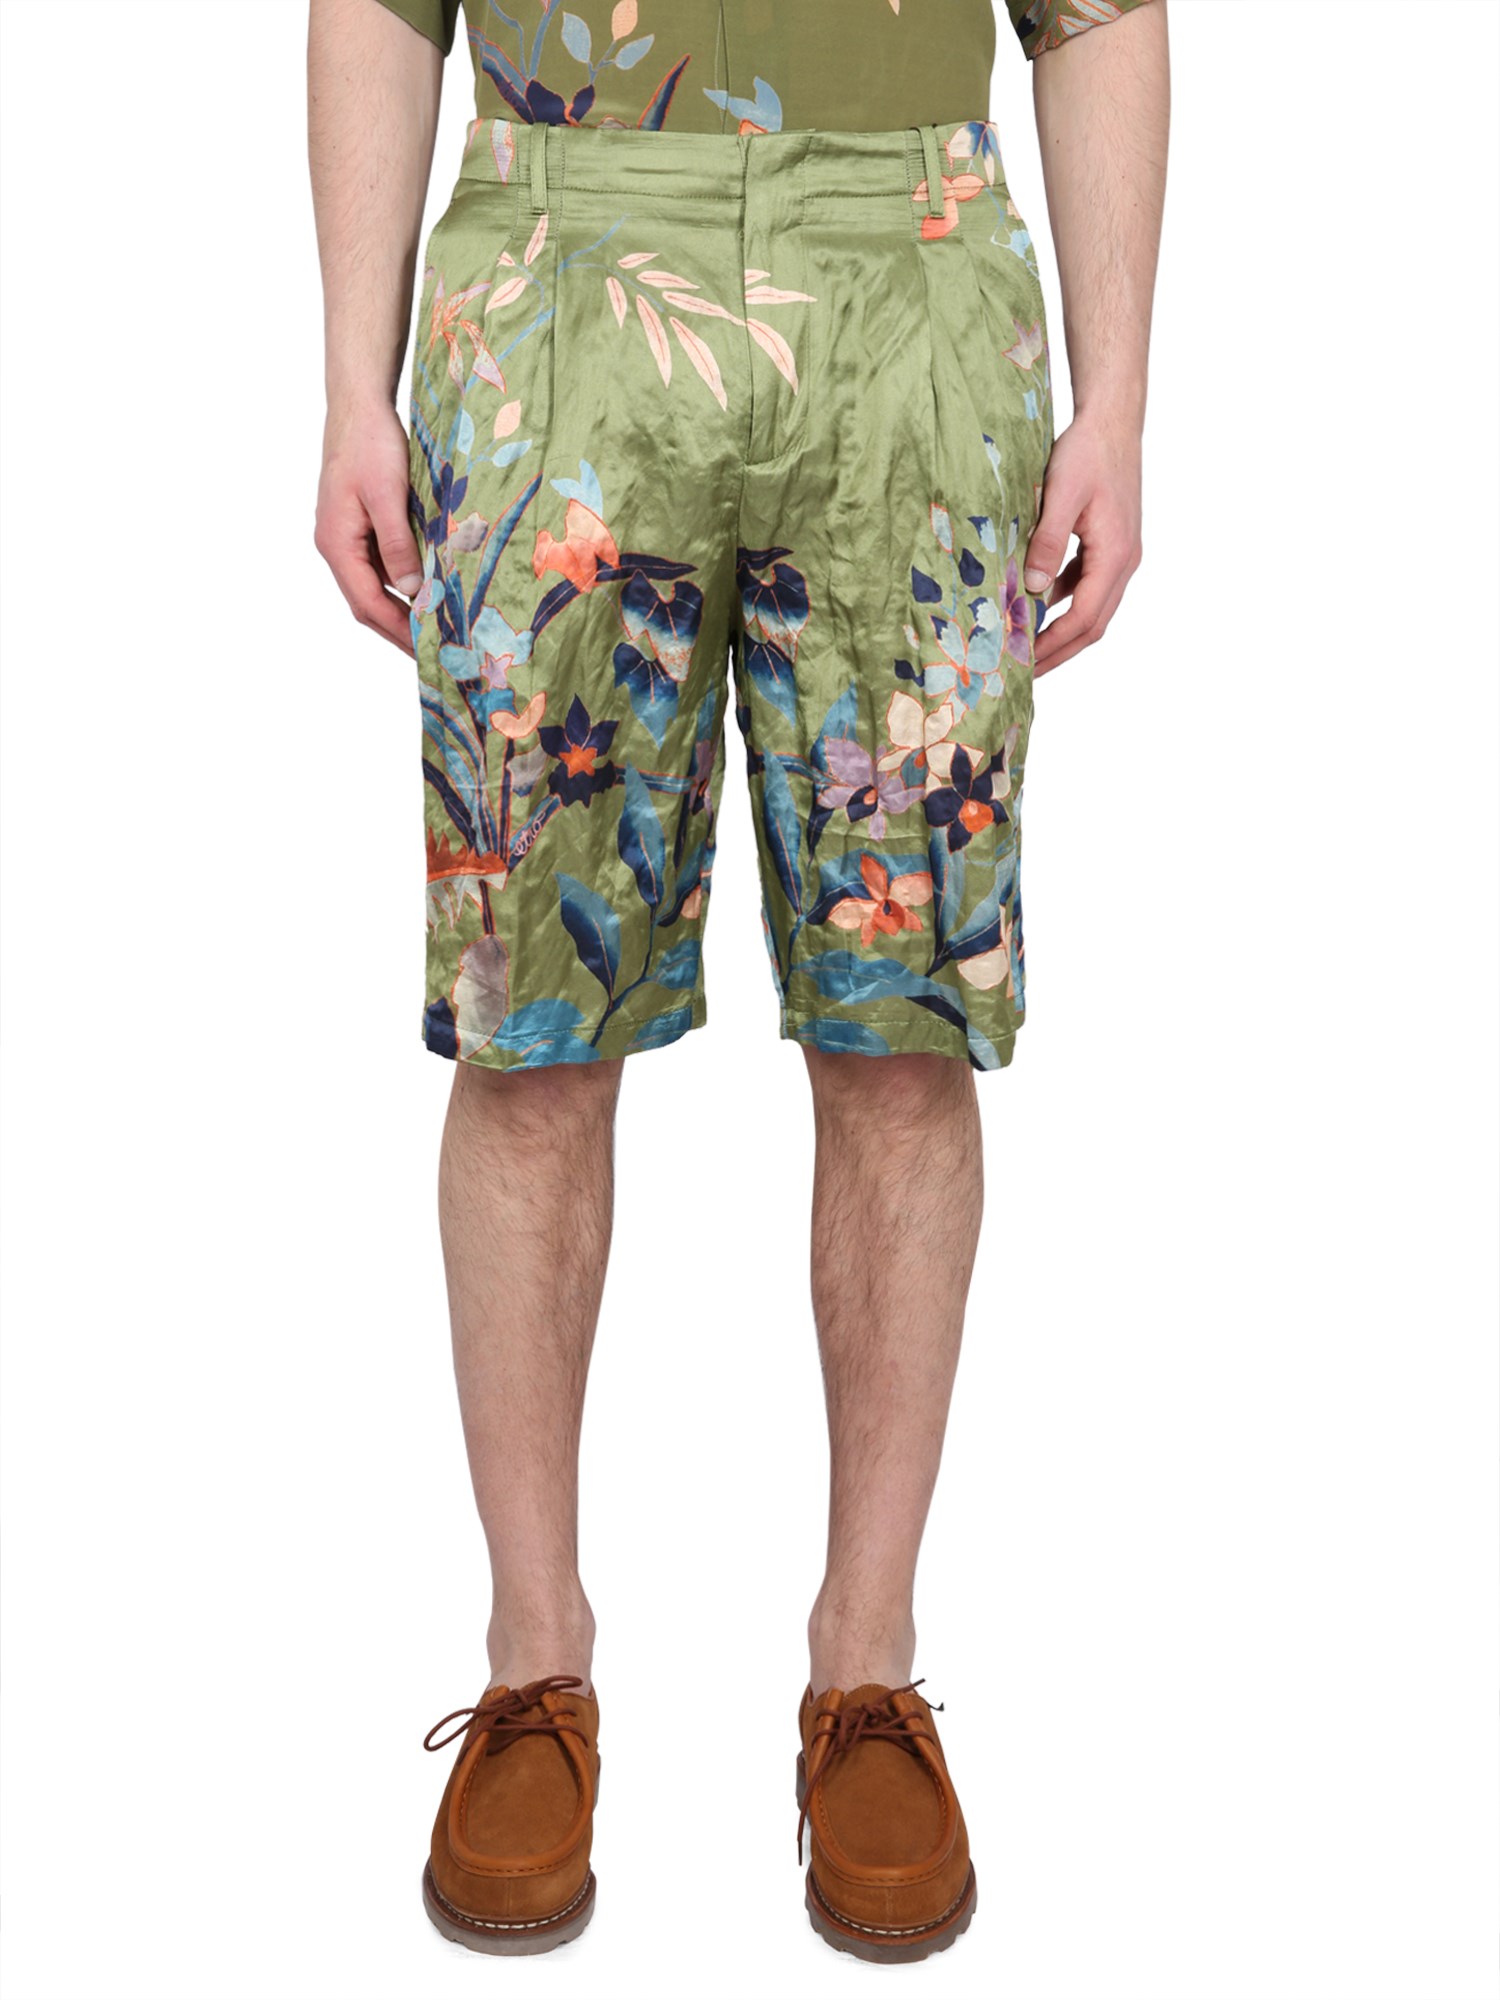 etro bermuda shorts with floral print